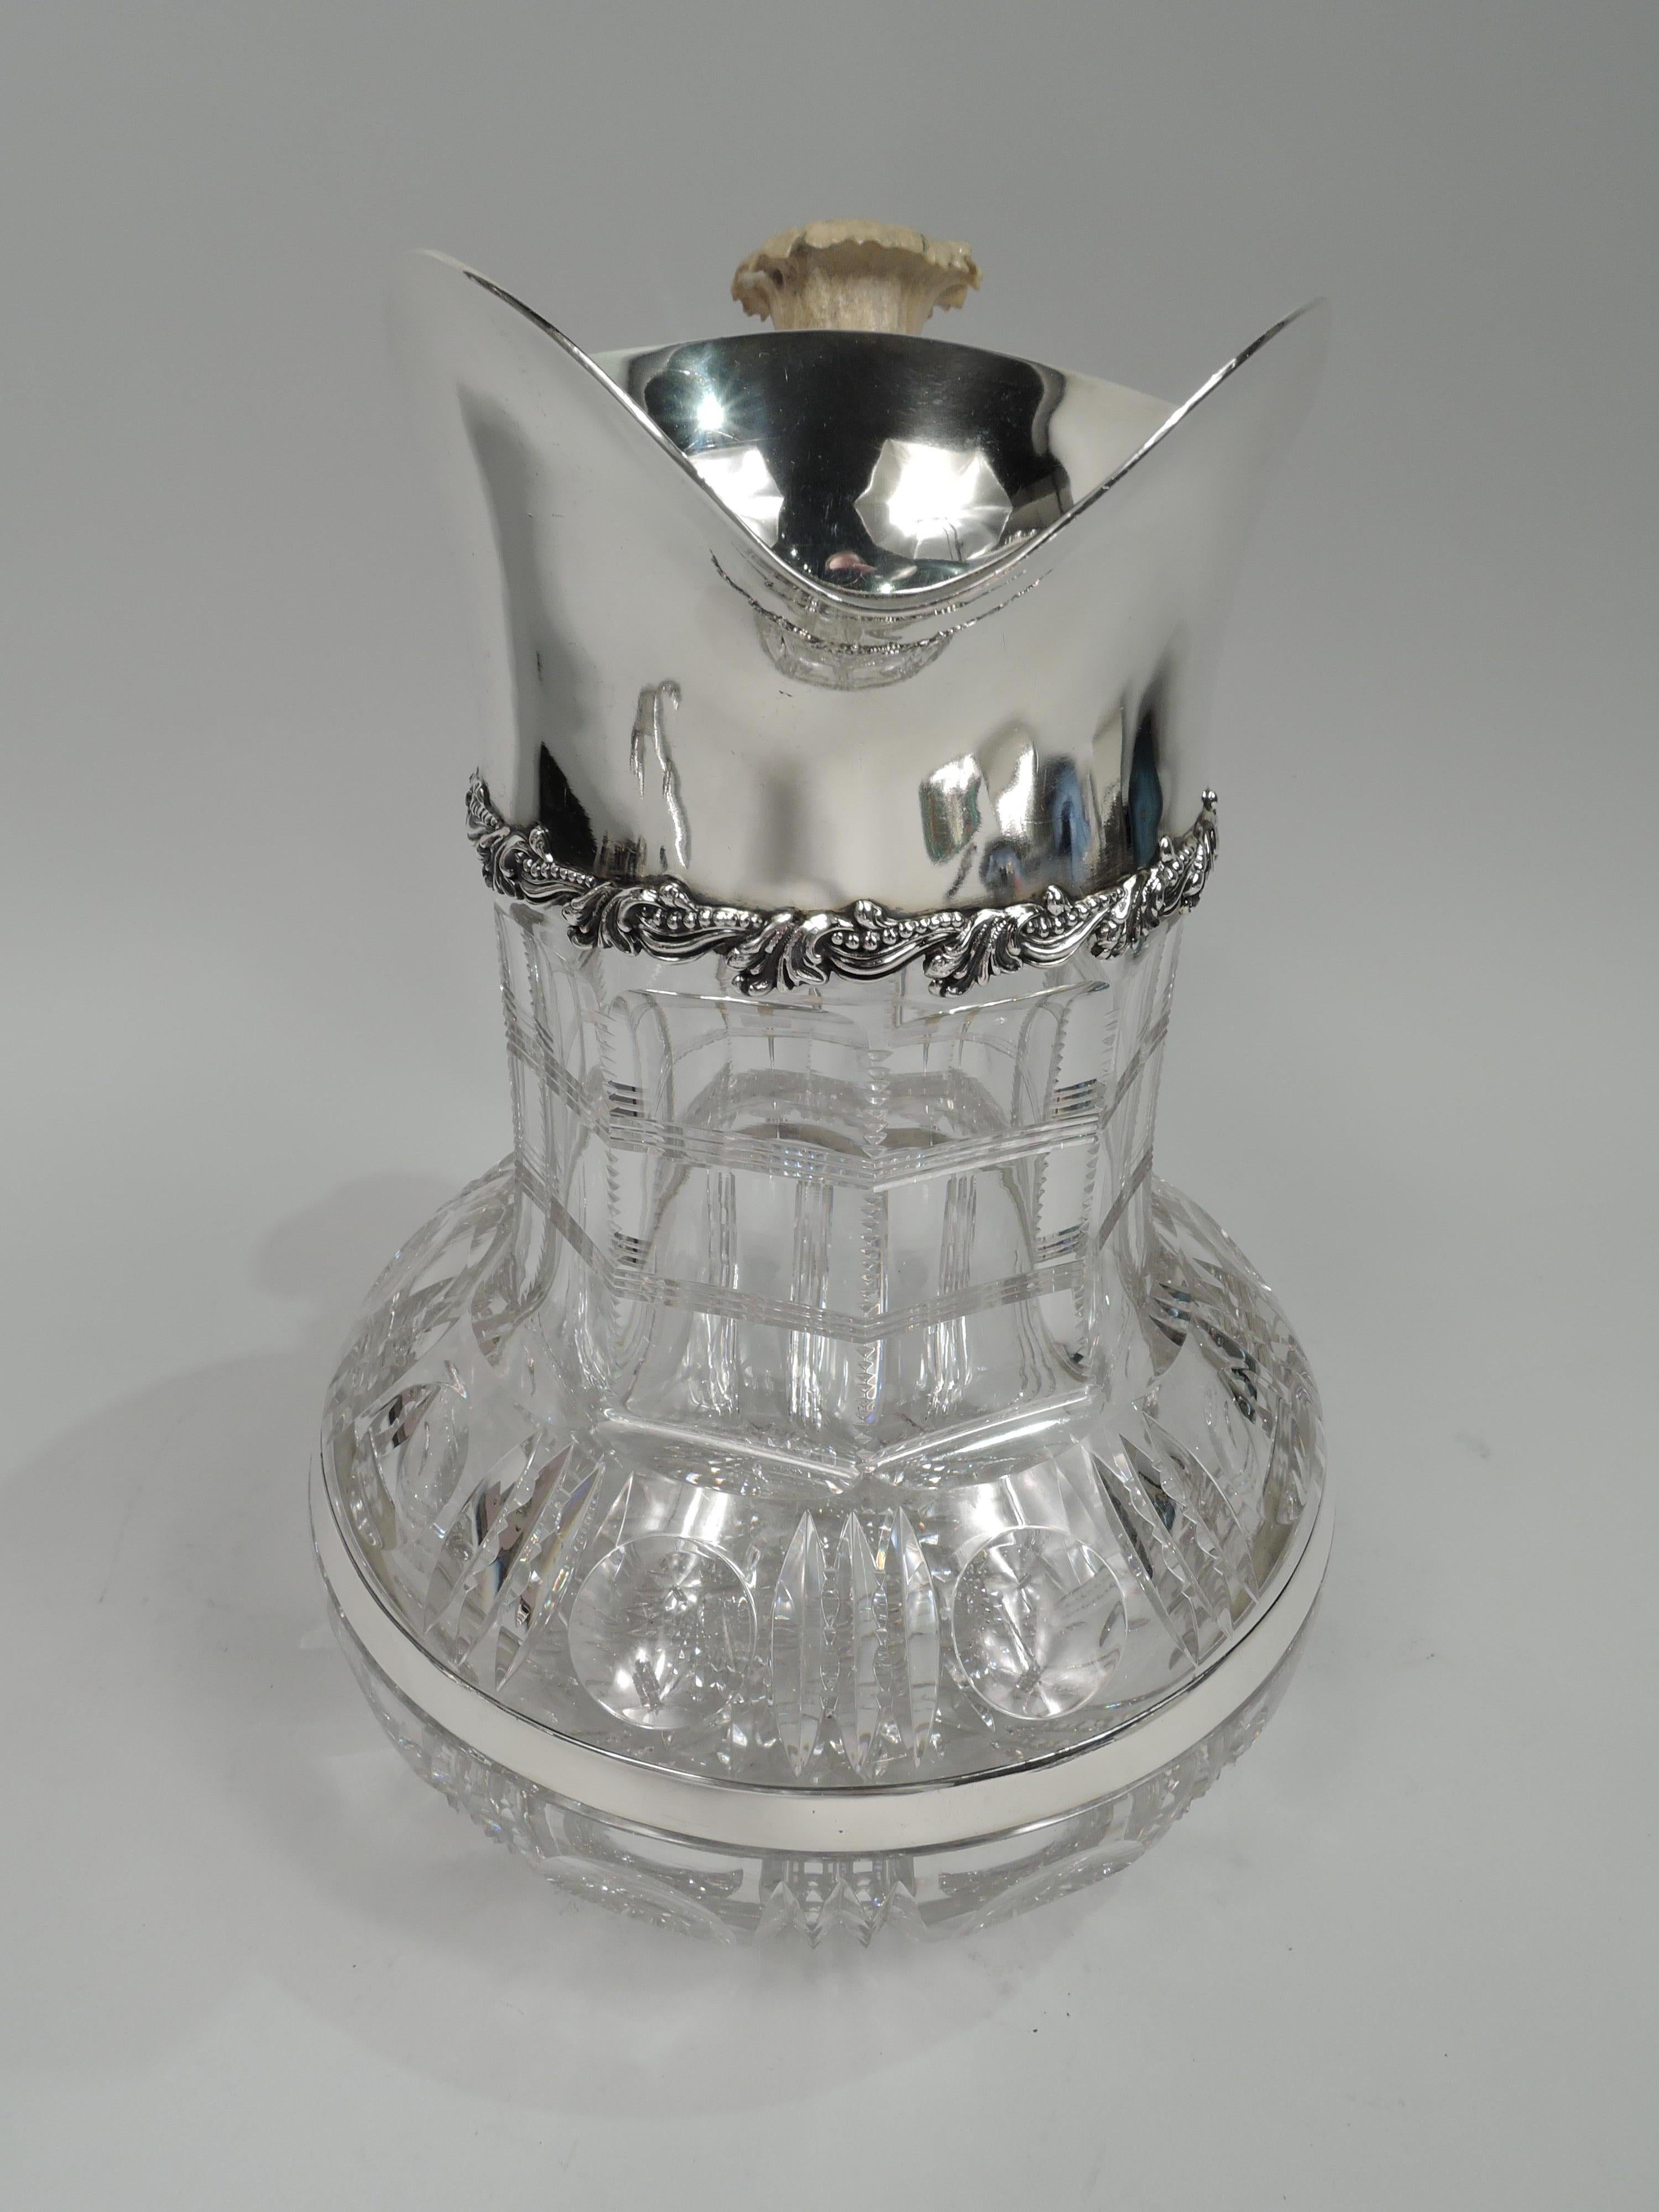 Edwardian Classical water pitcher. Made by Redlich in New York, ca 1890. Clear cut-glass with bead-and-reel bands on bowl and brilliant star on underside; Neck faceted and notched with reeded bands. Sterling silver collar with helmet mouth and